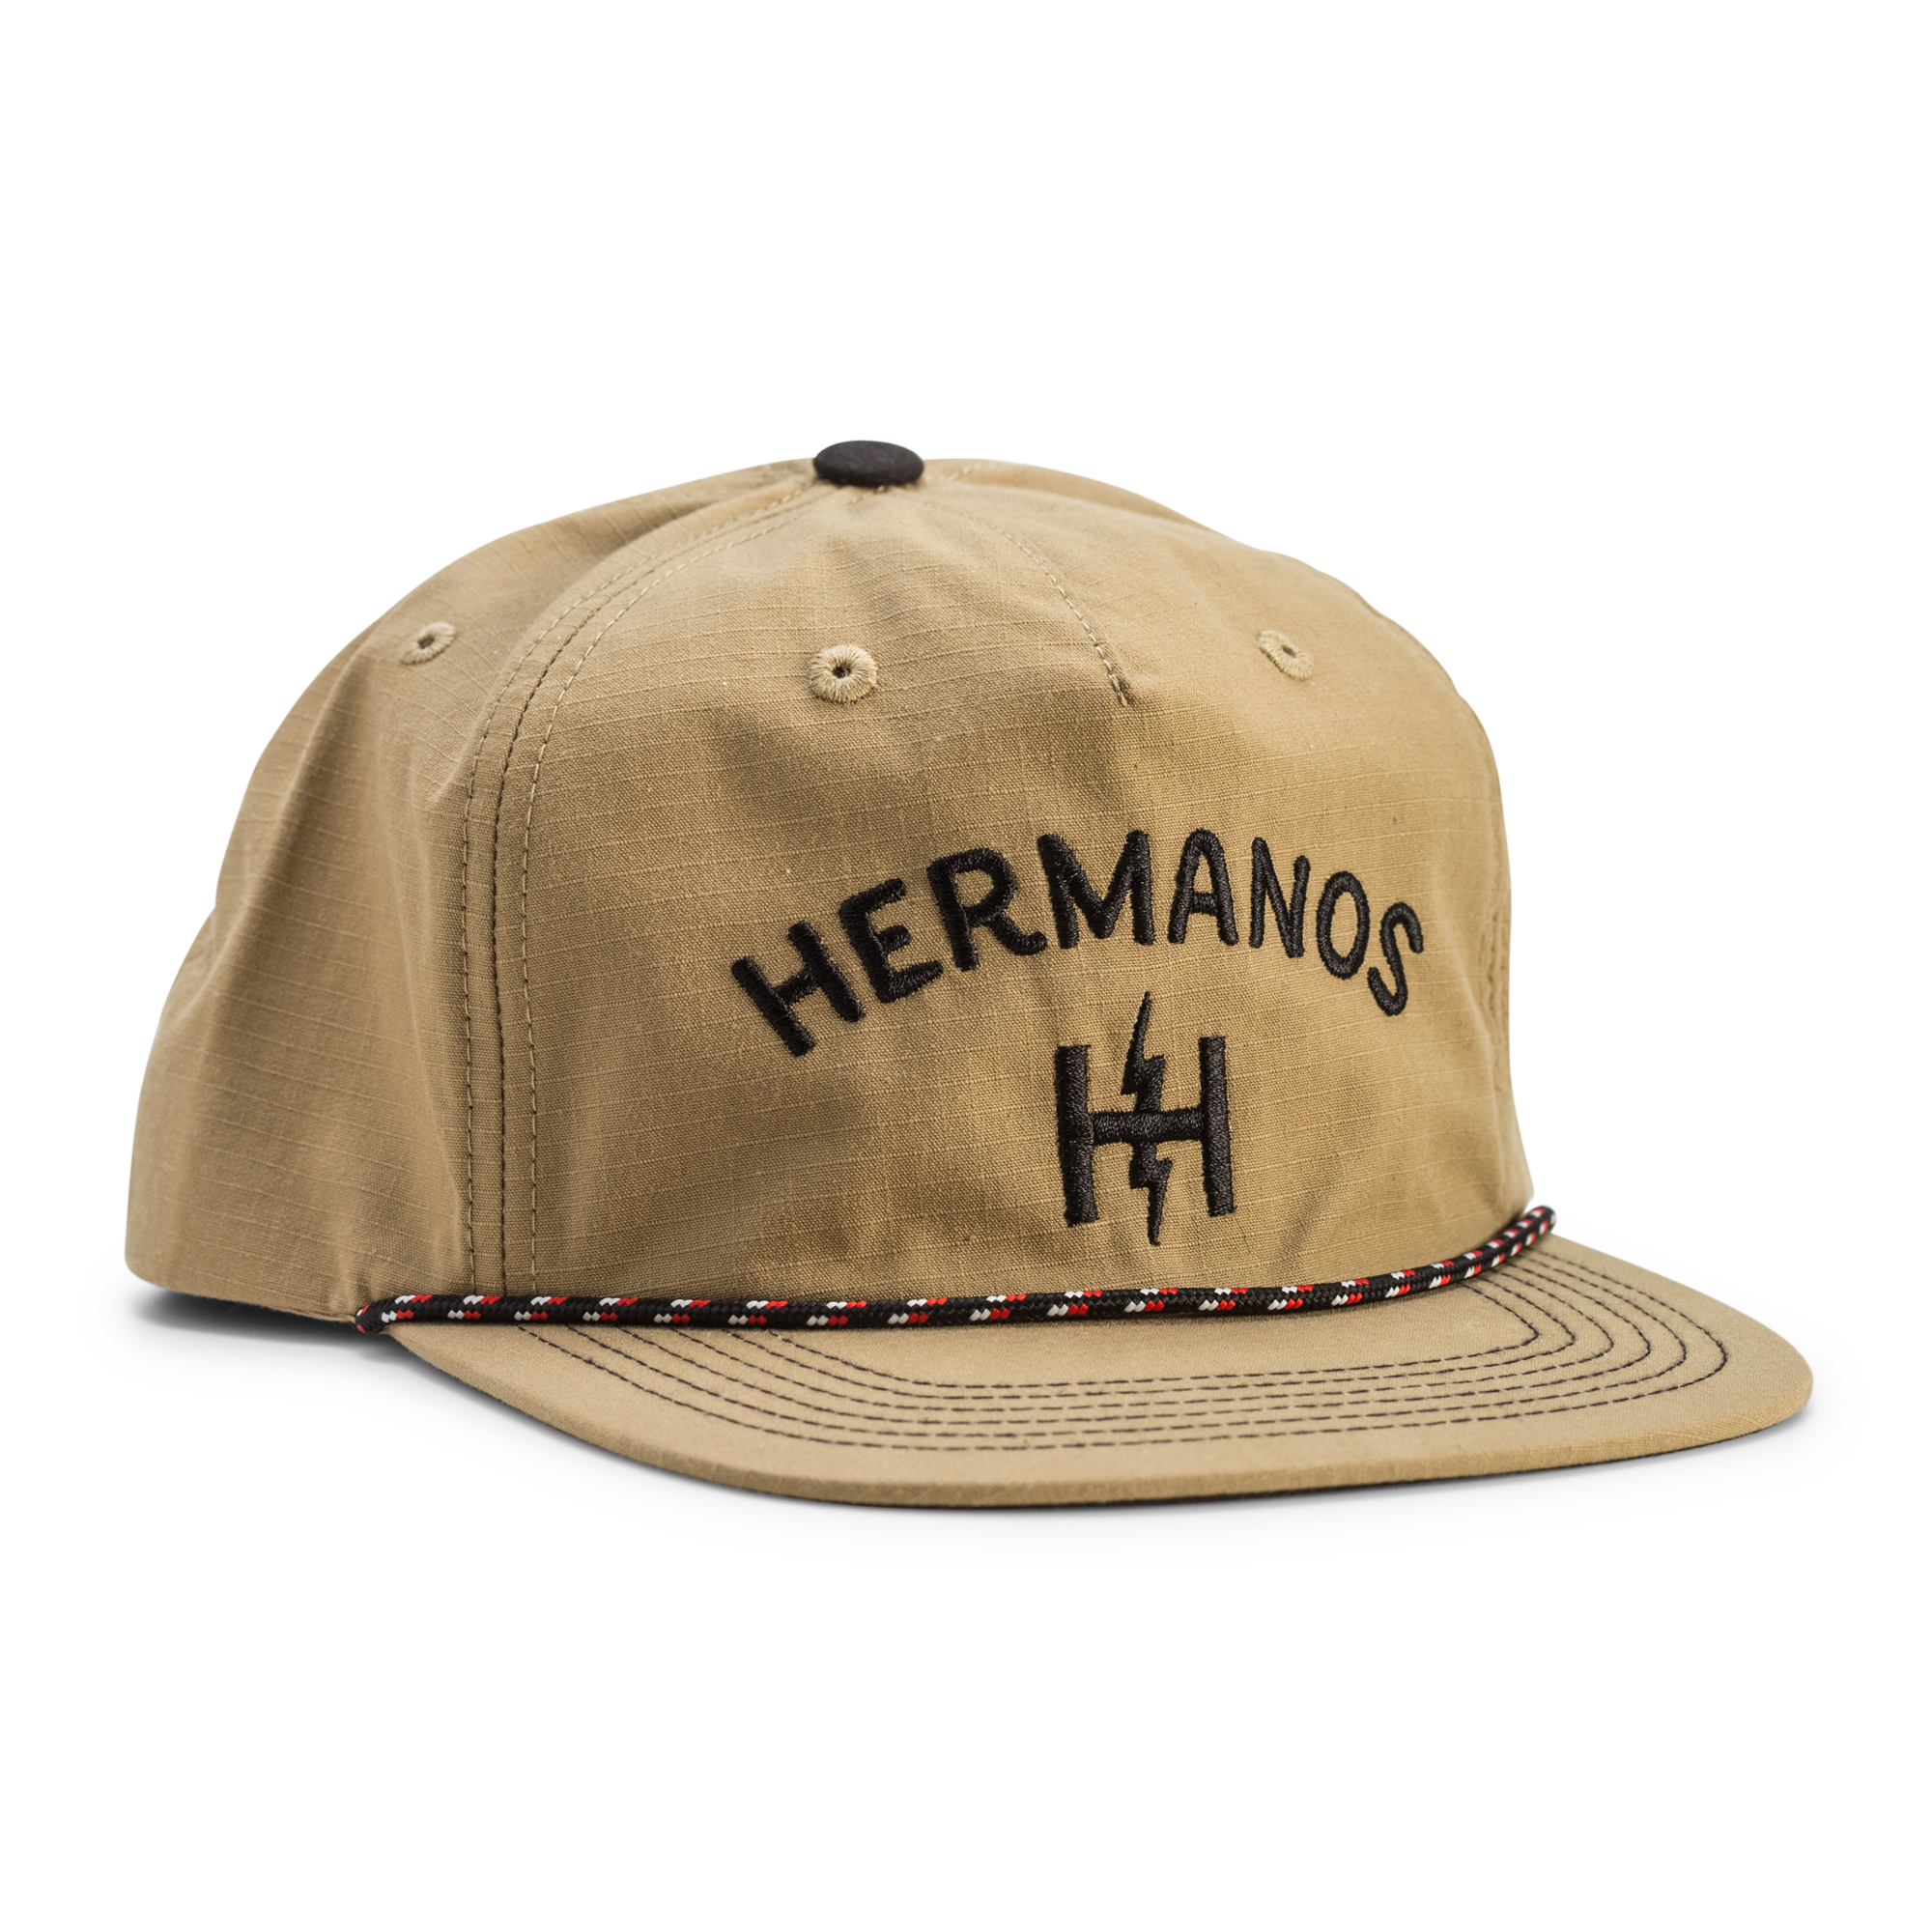 Howler Brothers Unstructured Snapback: Hermanos